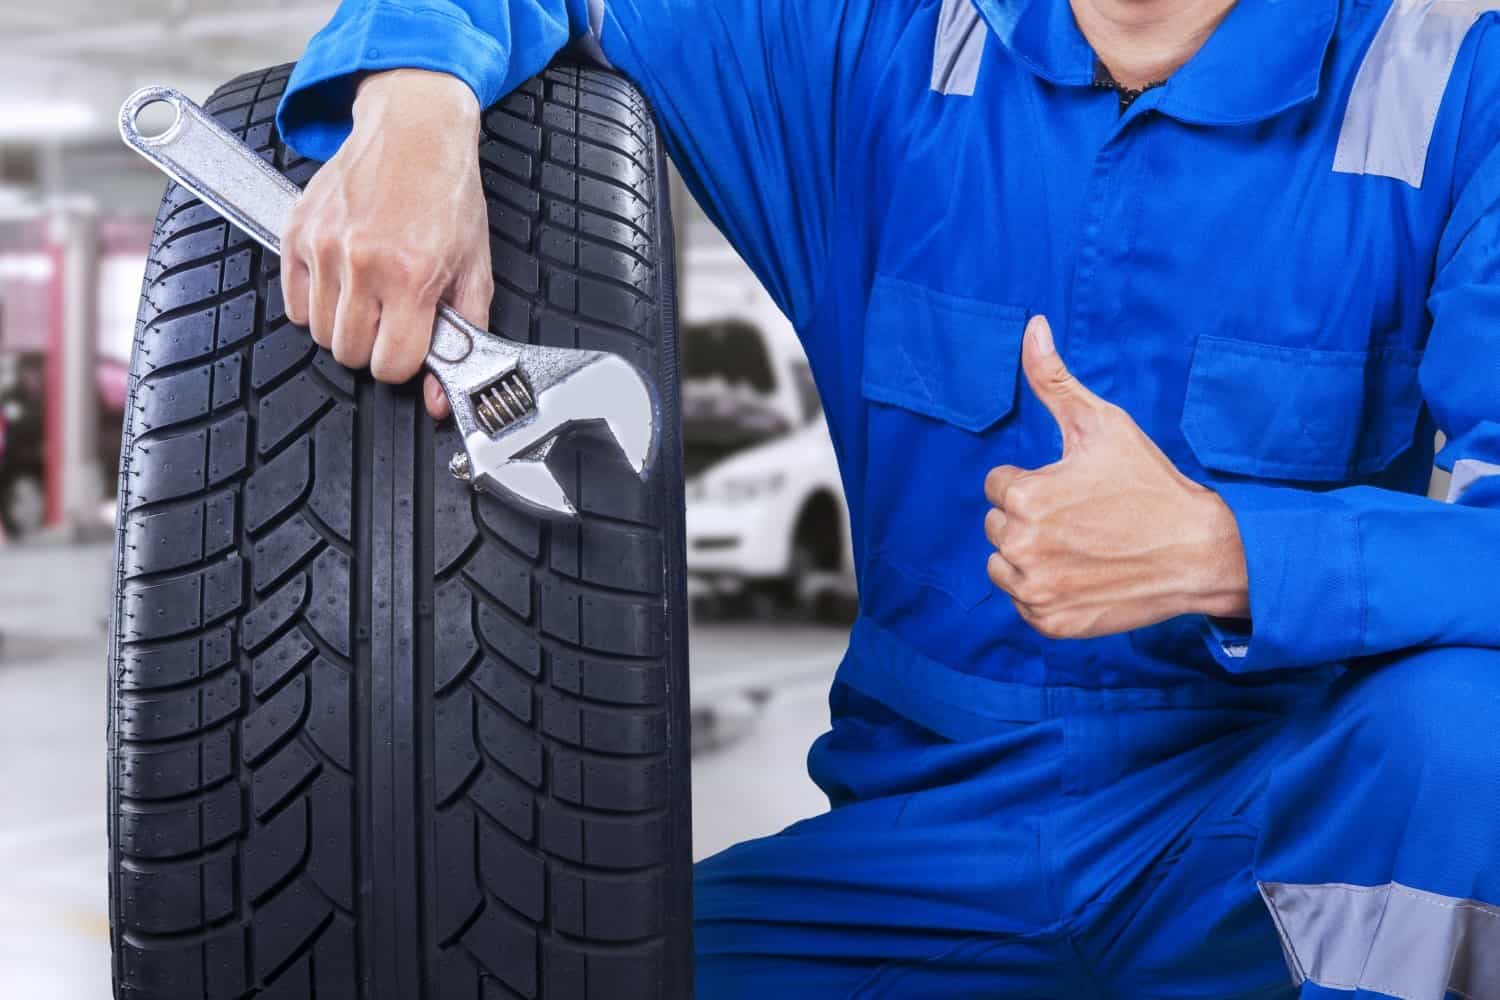 Car Servicing - stock-photo-technician-with-a-blue-workwear-holding-a-wrench-and-a-tire-while-showing-thumb-up-262878917-min